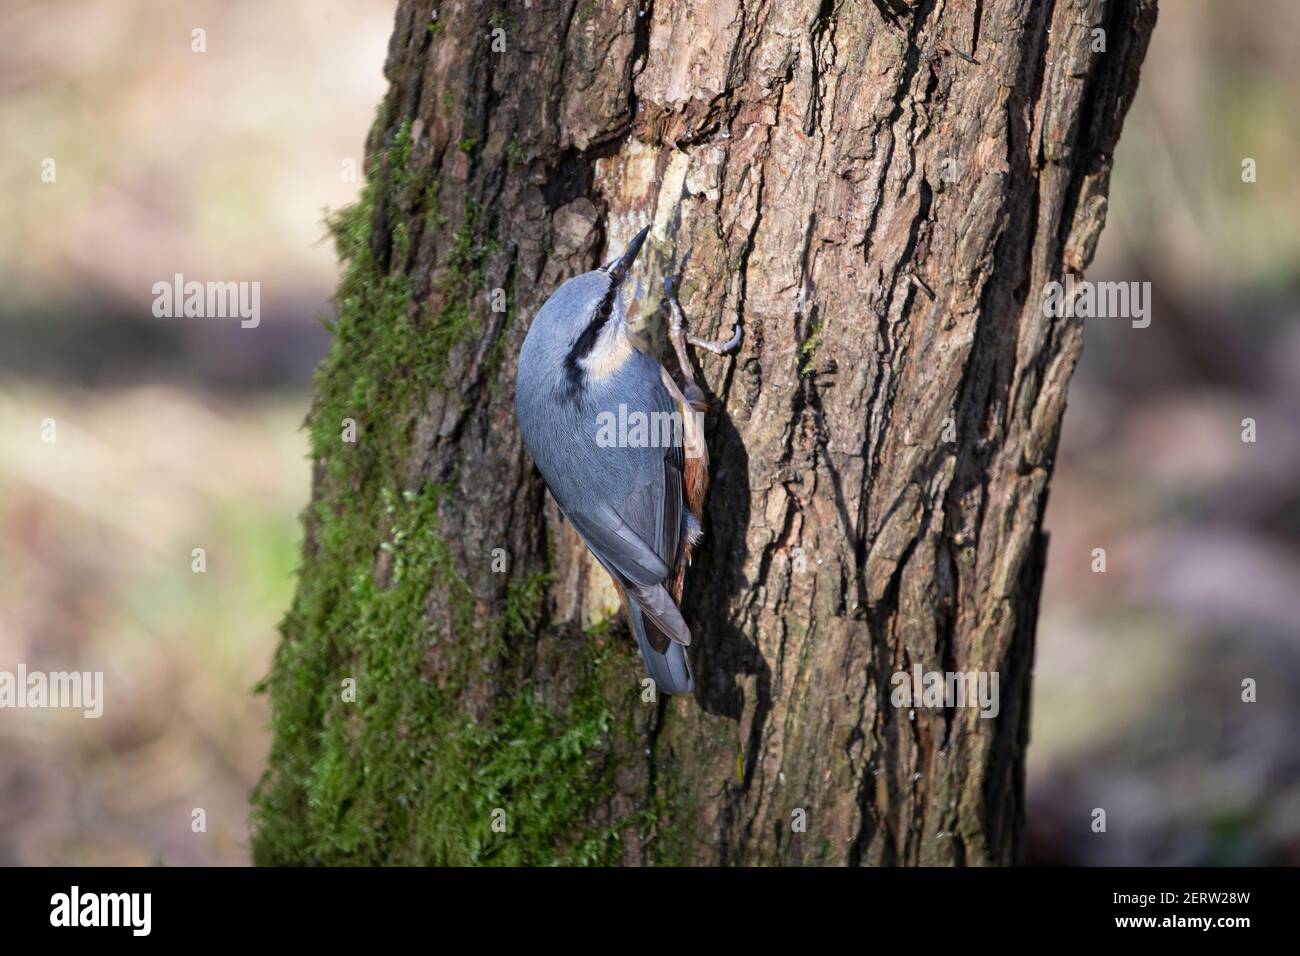 Nuthatch bird Sitta europaea clinging to the bark of a mossy tree trunk in spring Stock Photo